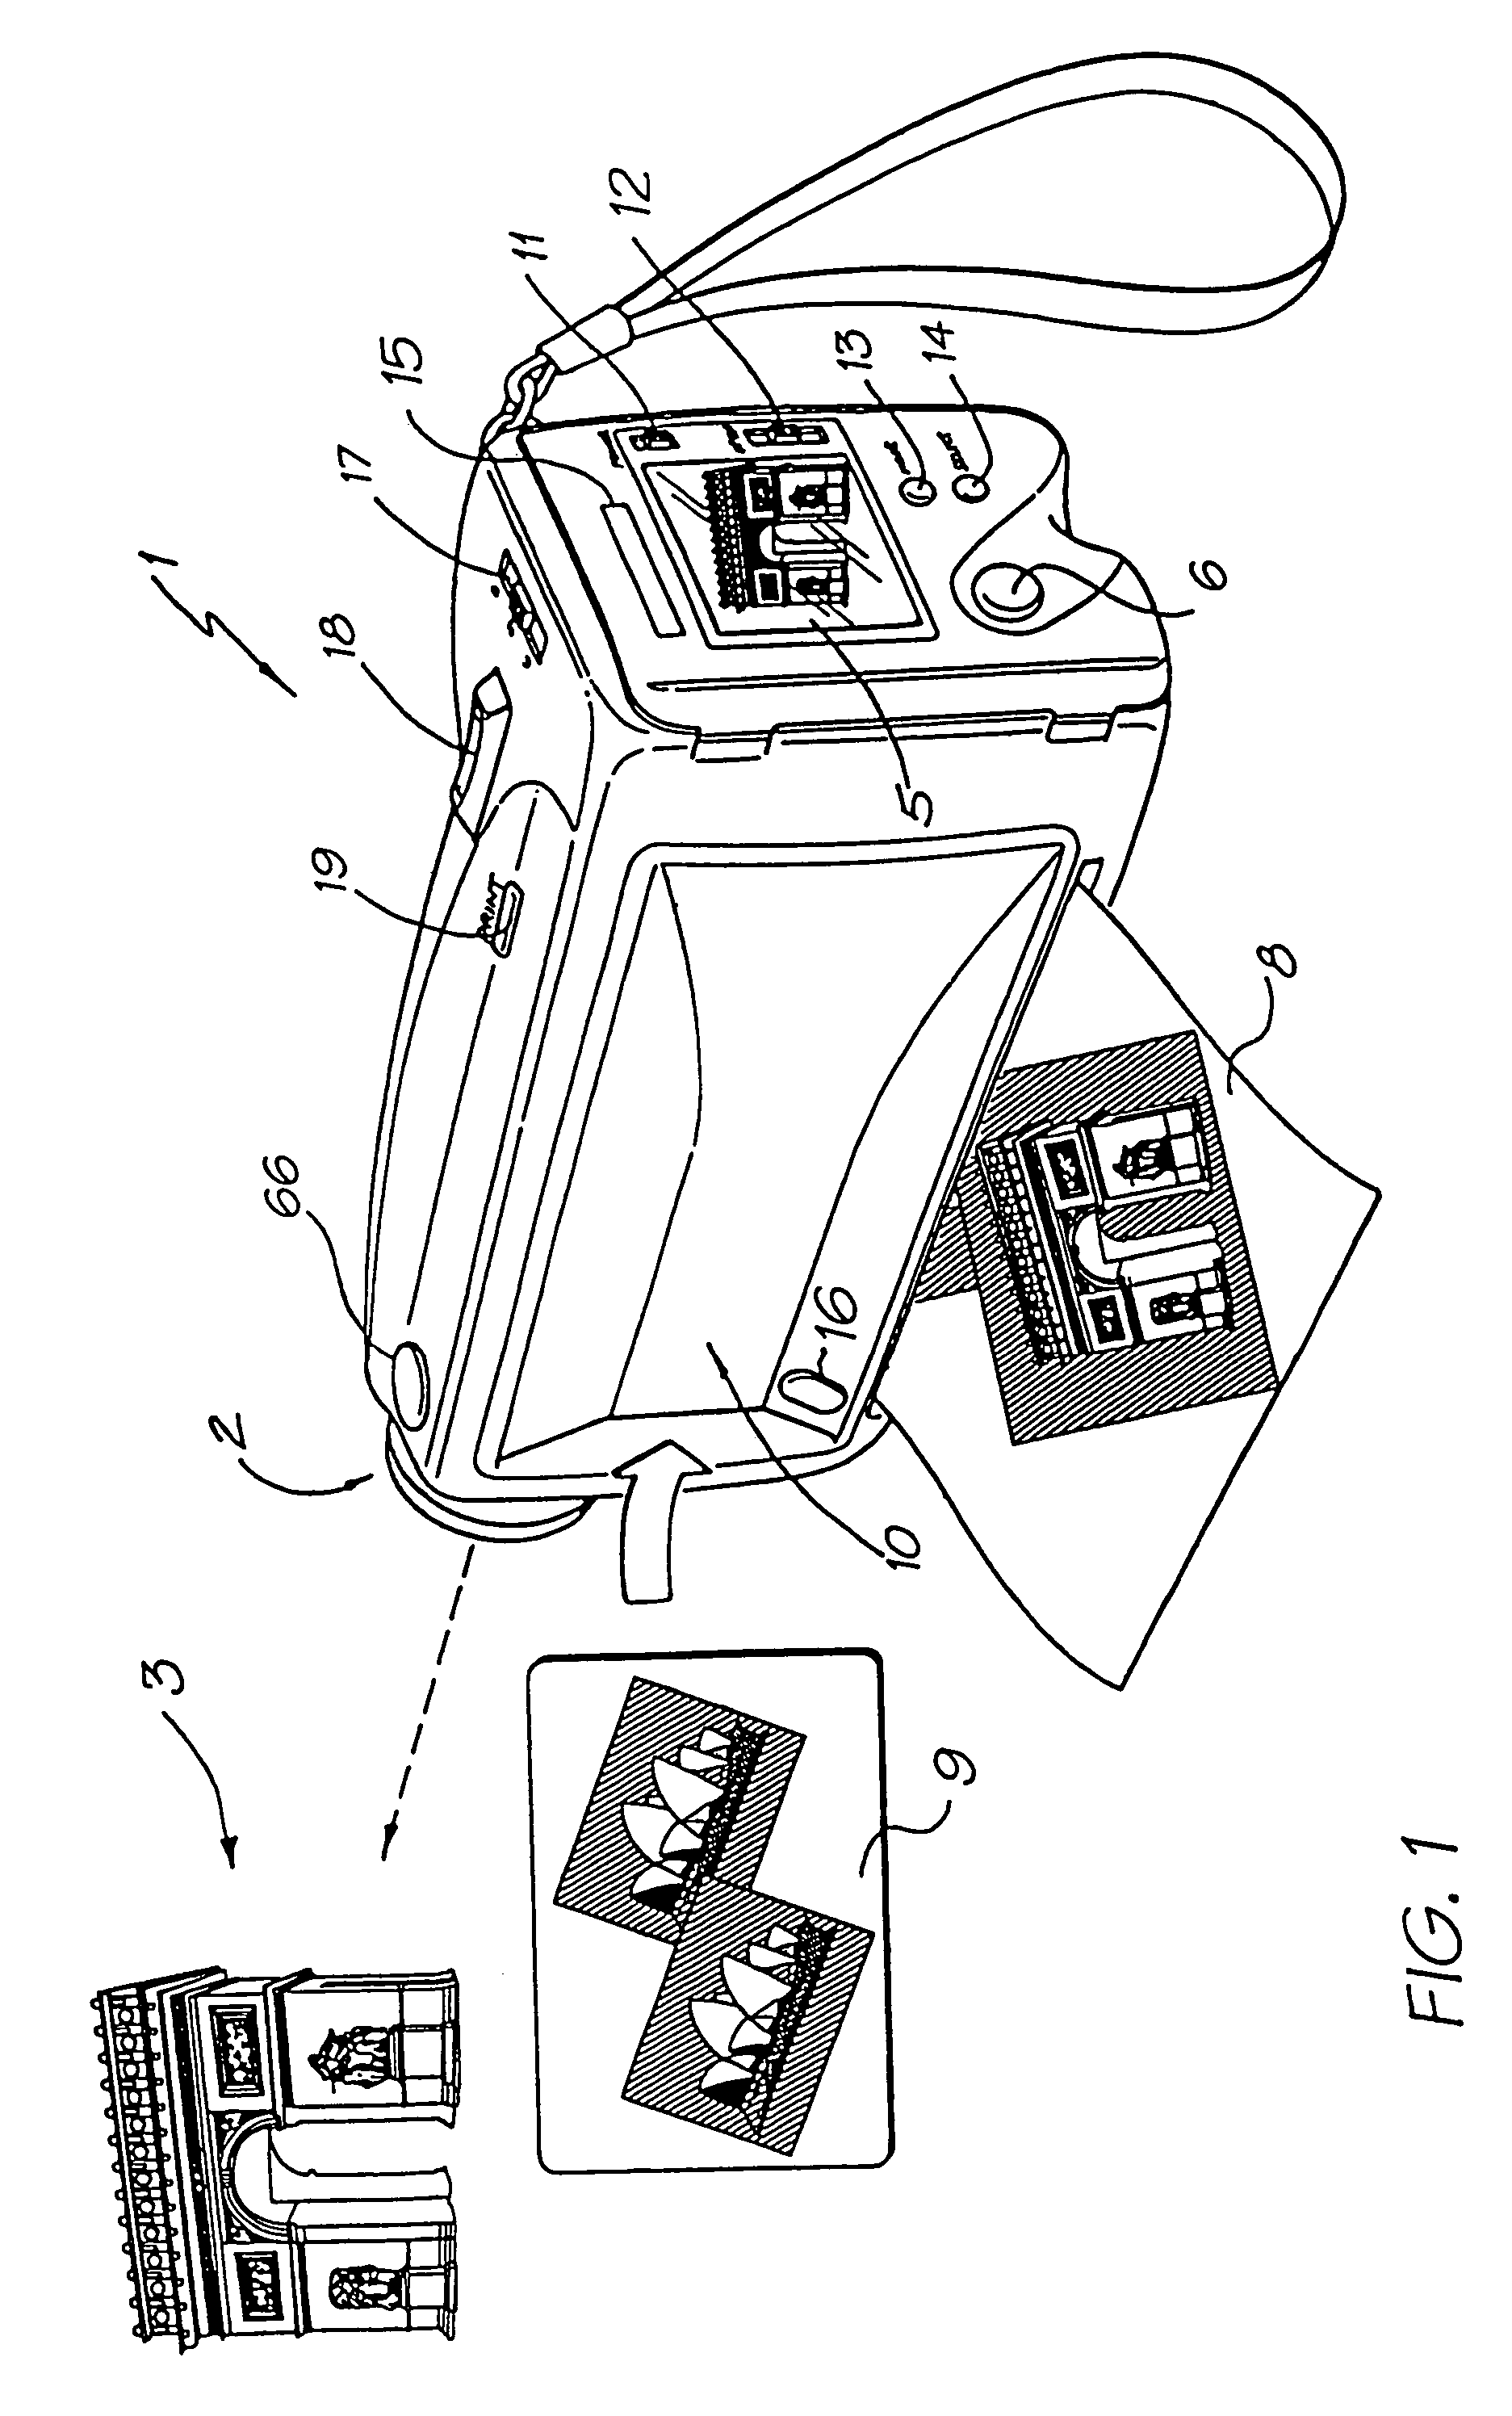 Redundantly encoded data structure for encoding a surface